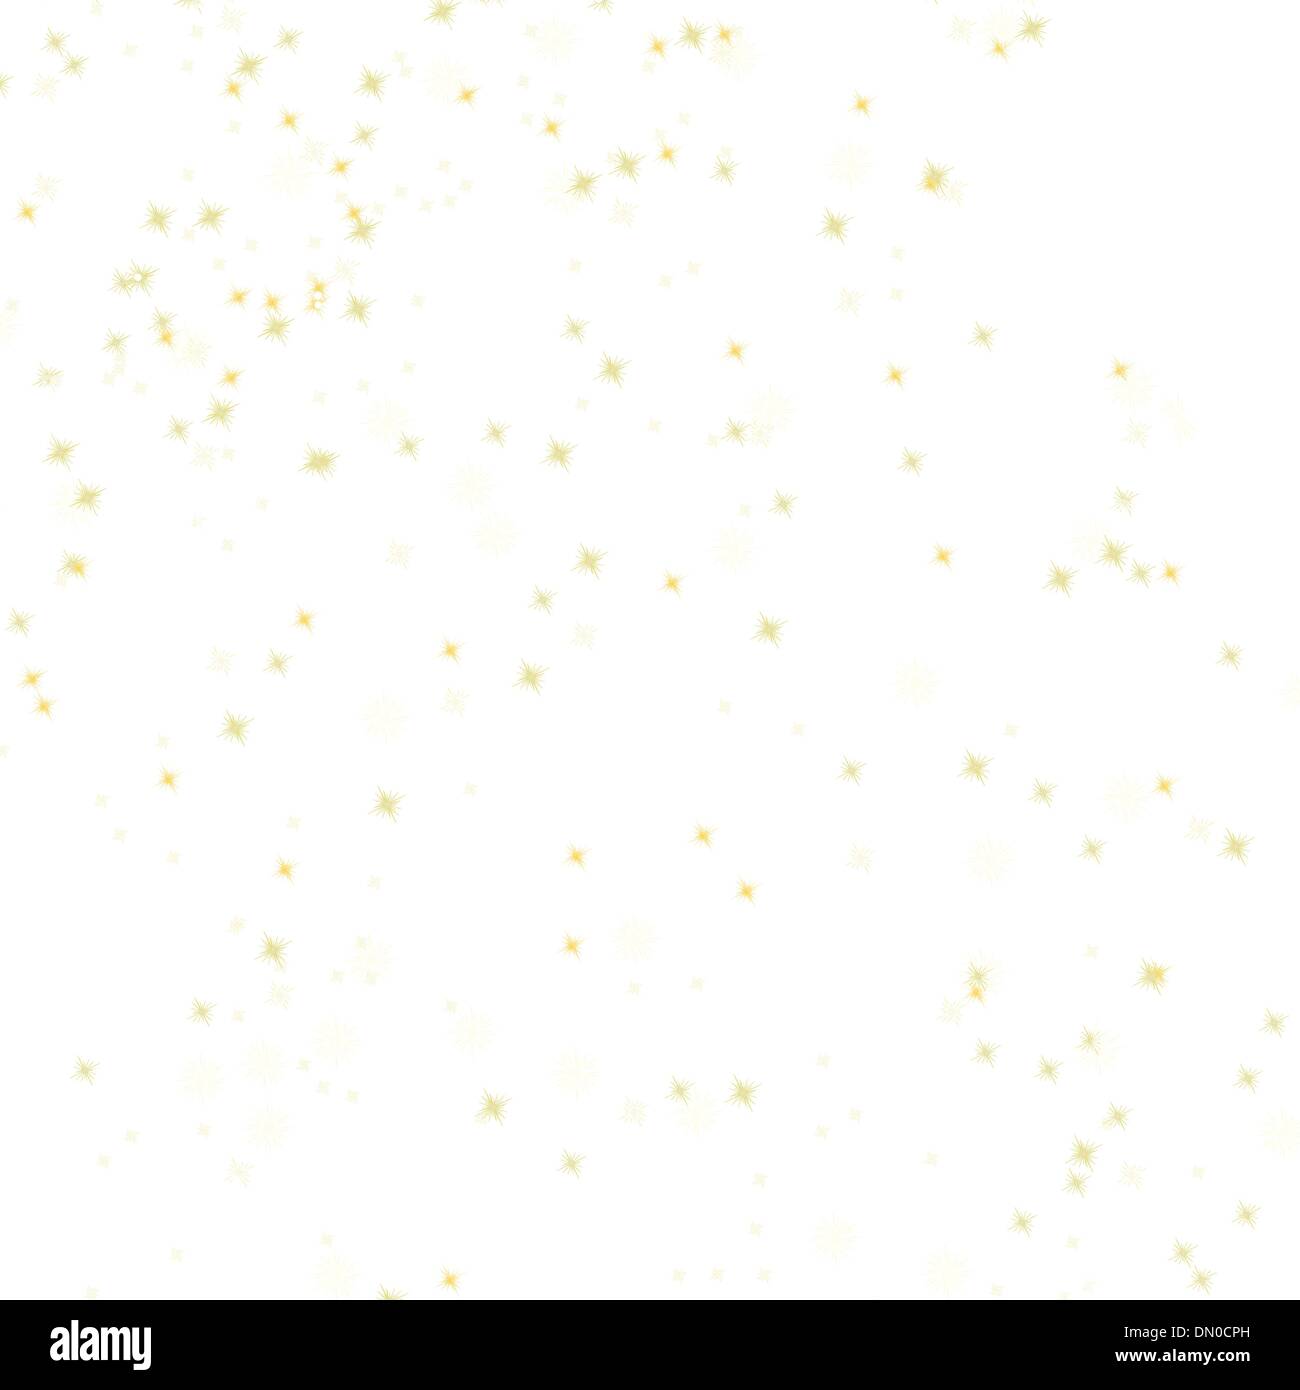 Snowflakes and stars on golden light. EPS 8 Stock Vector